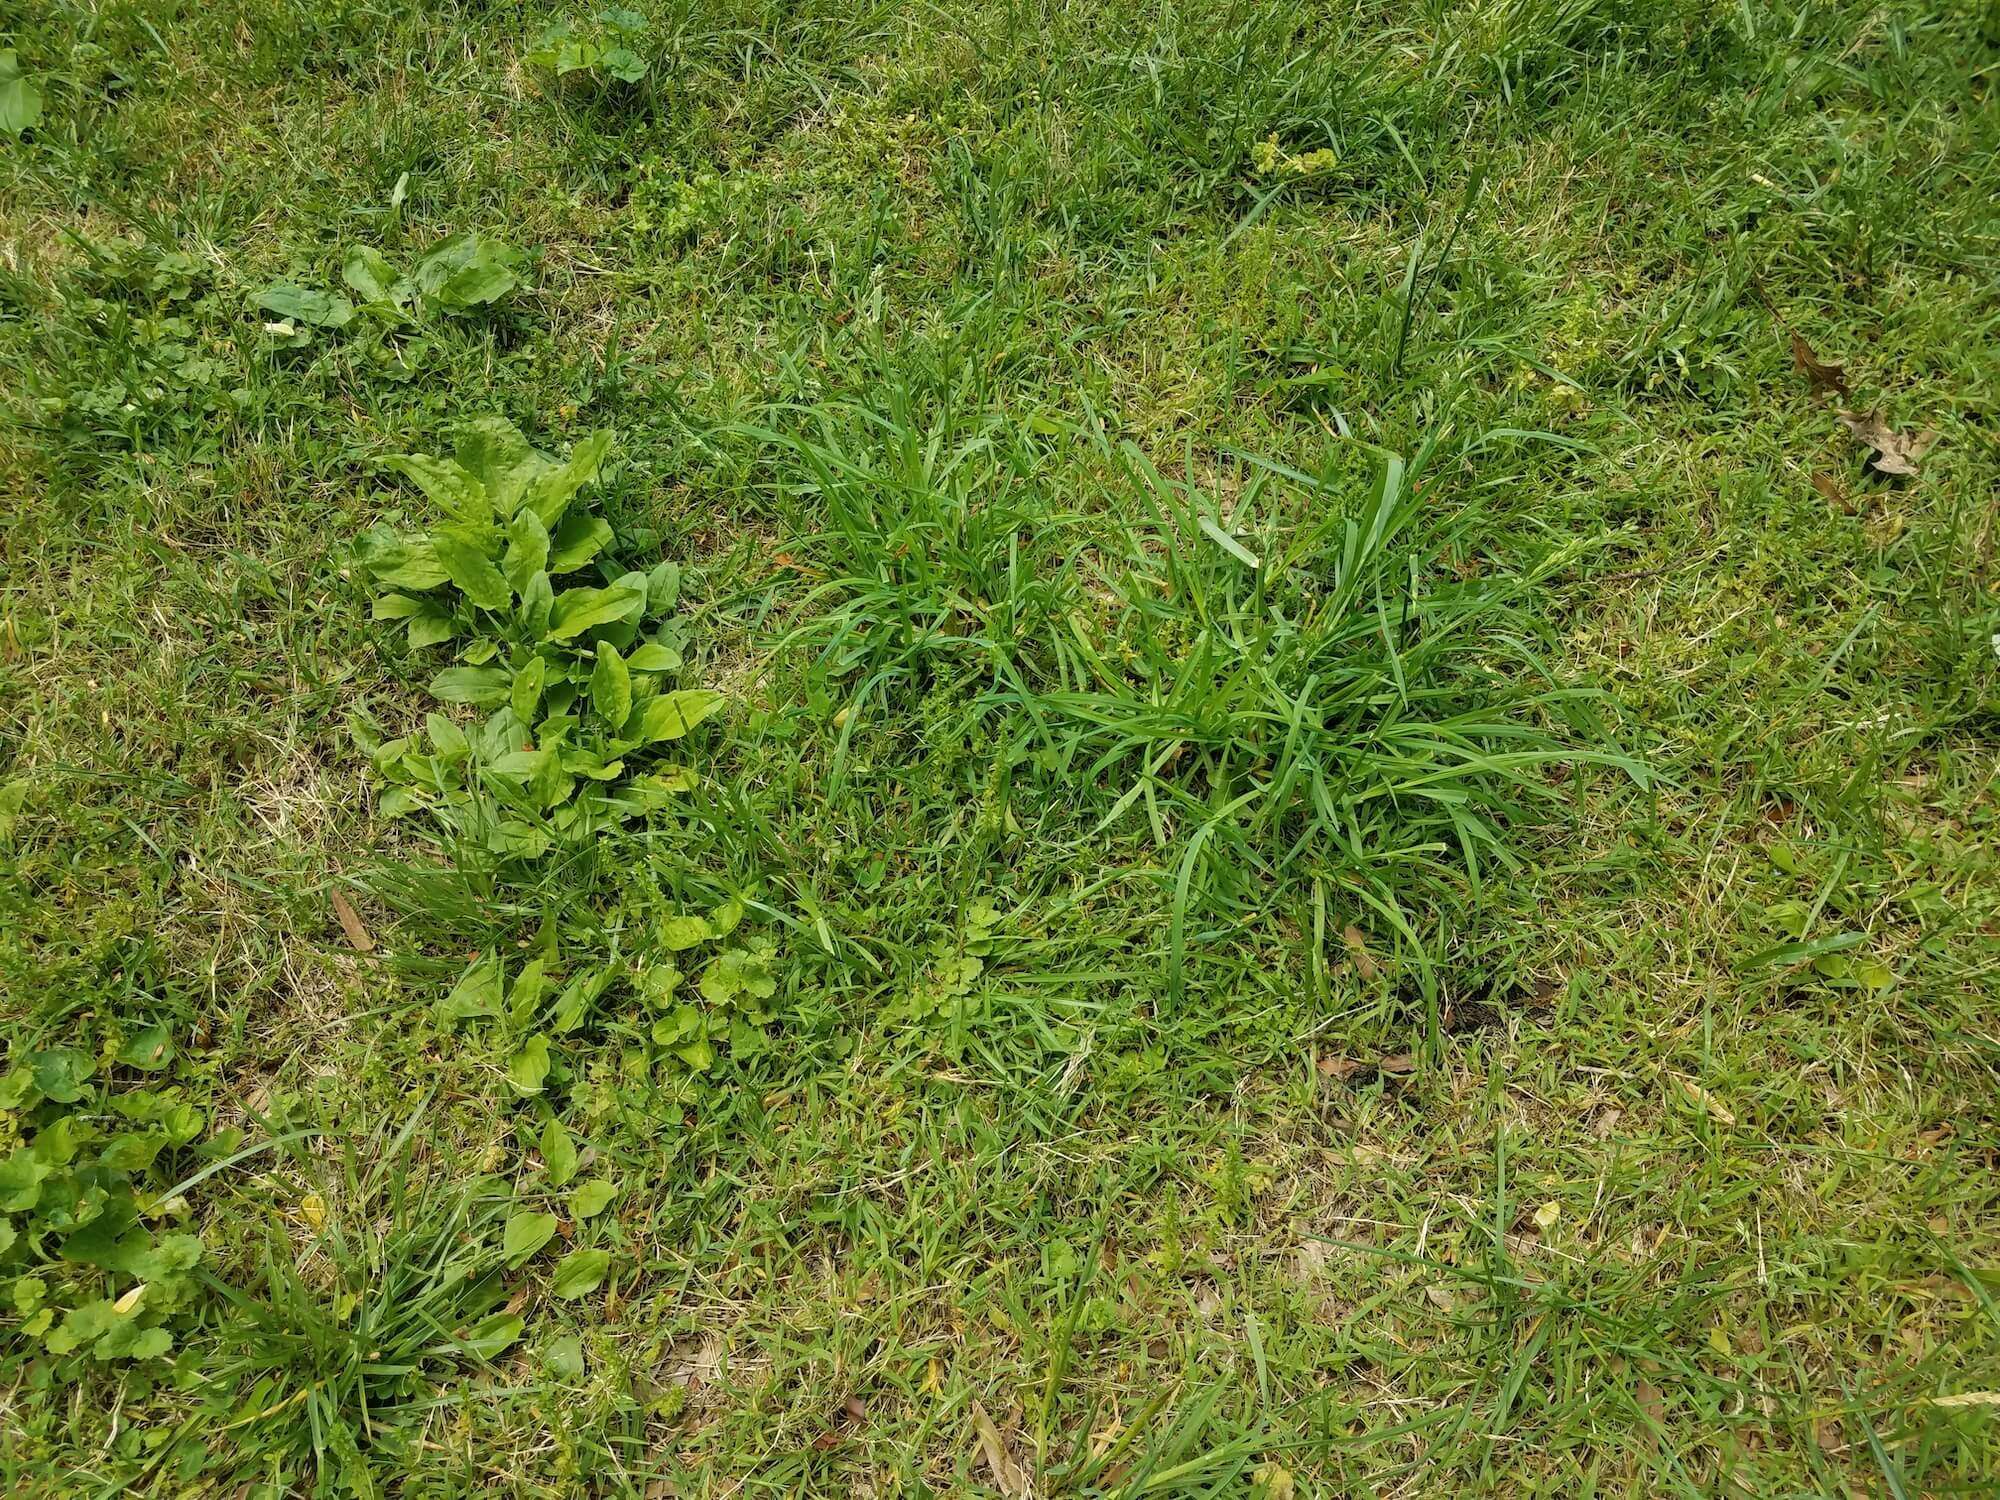 How to Restore a Lawn Full of Weeds